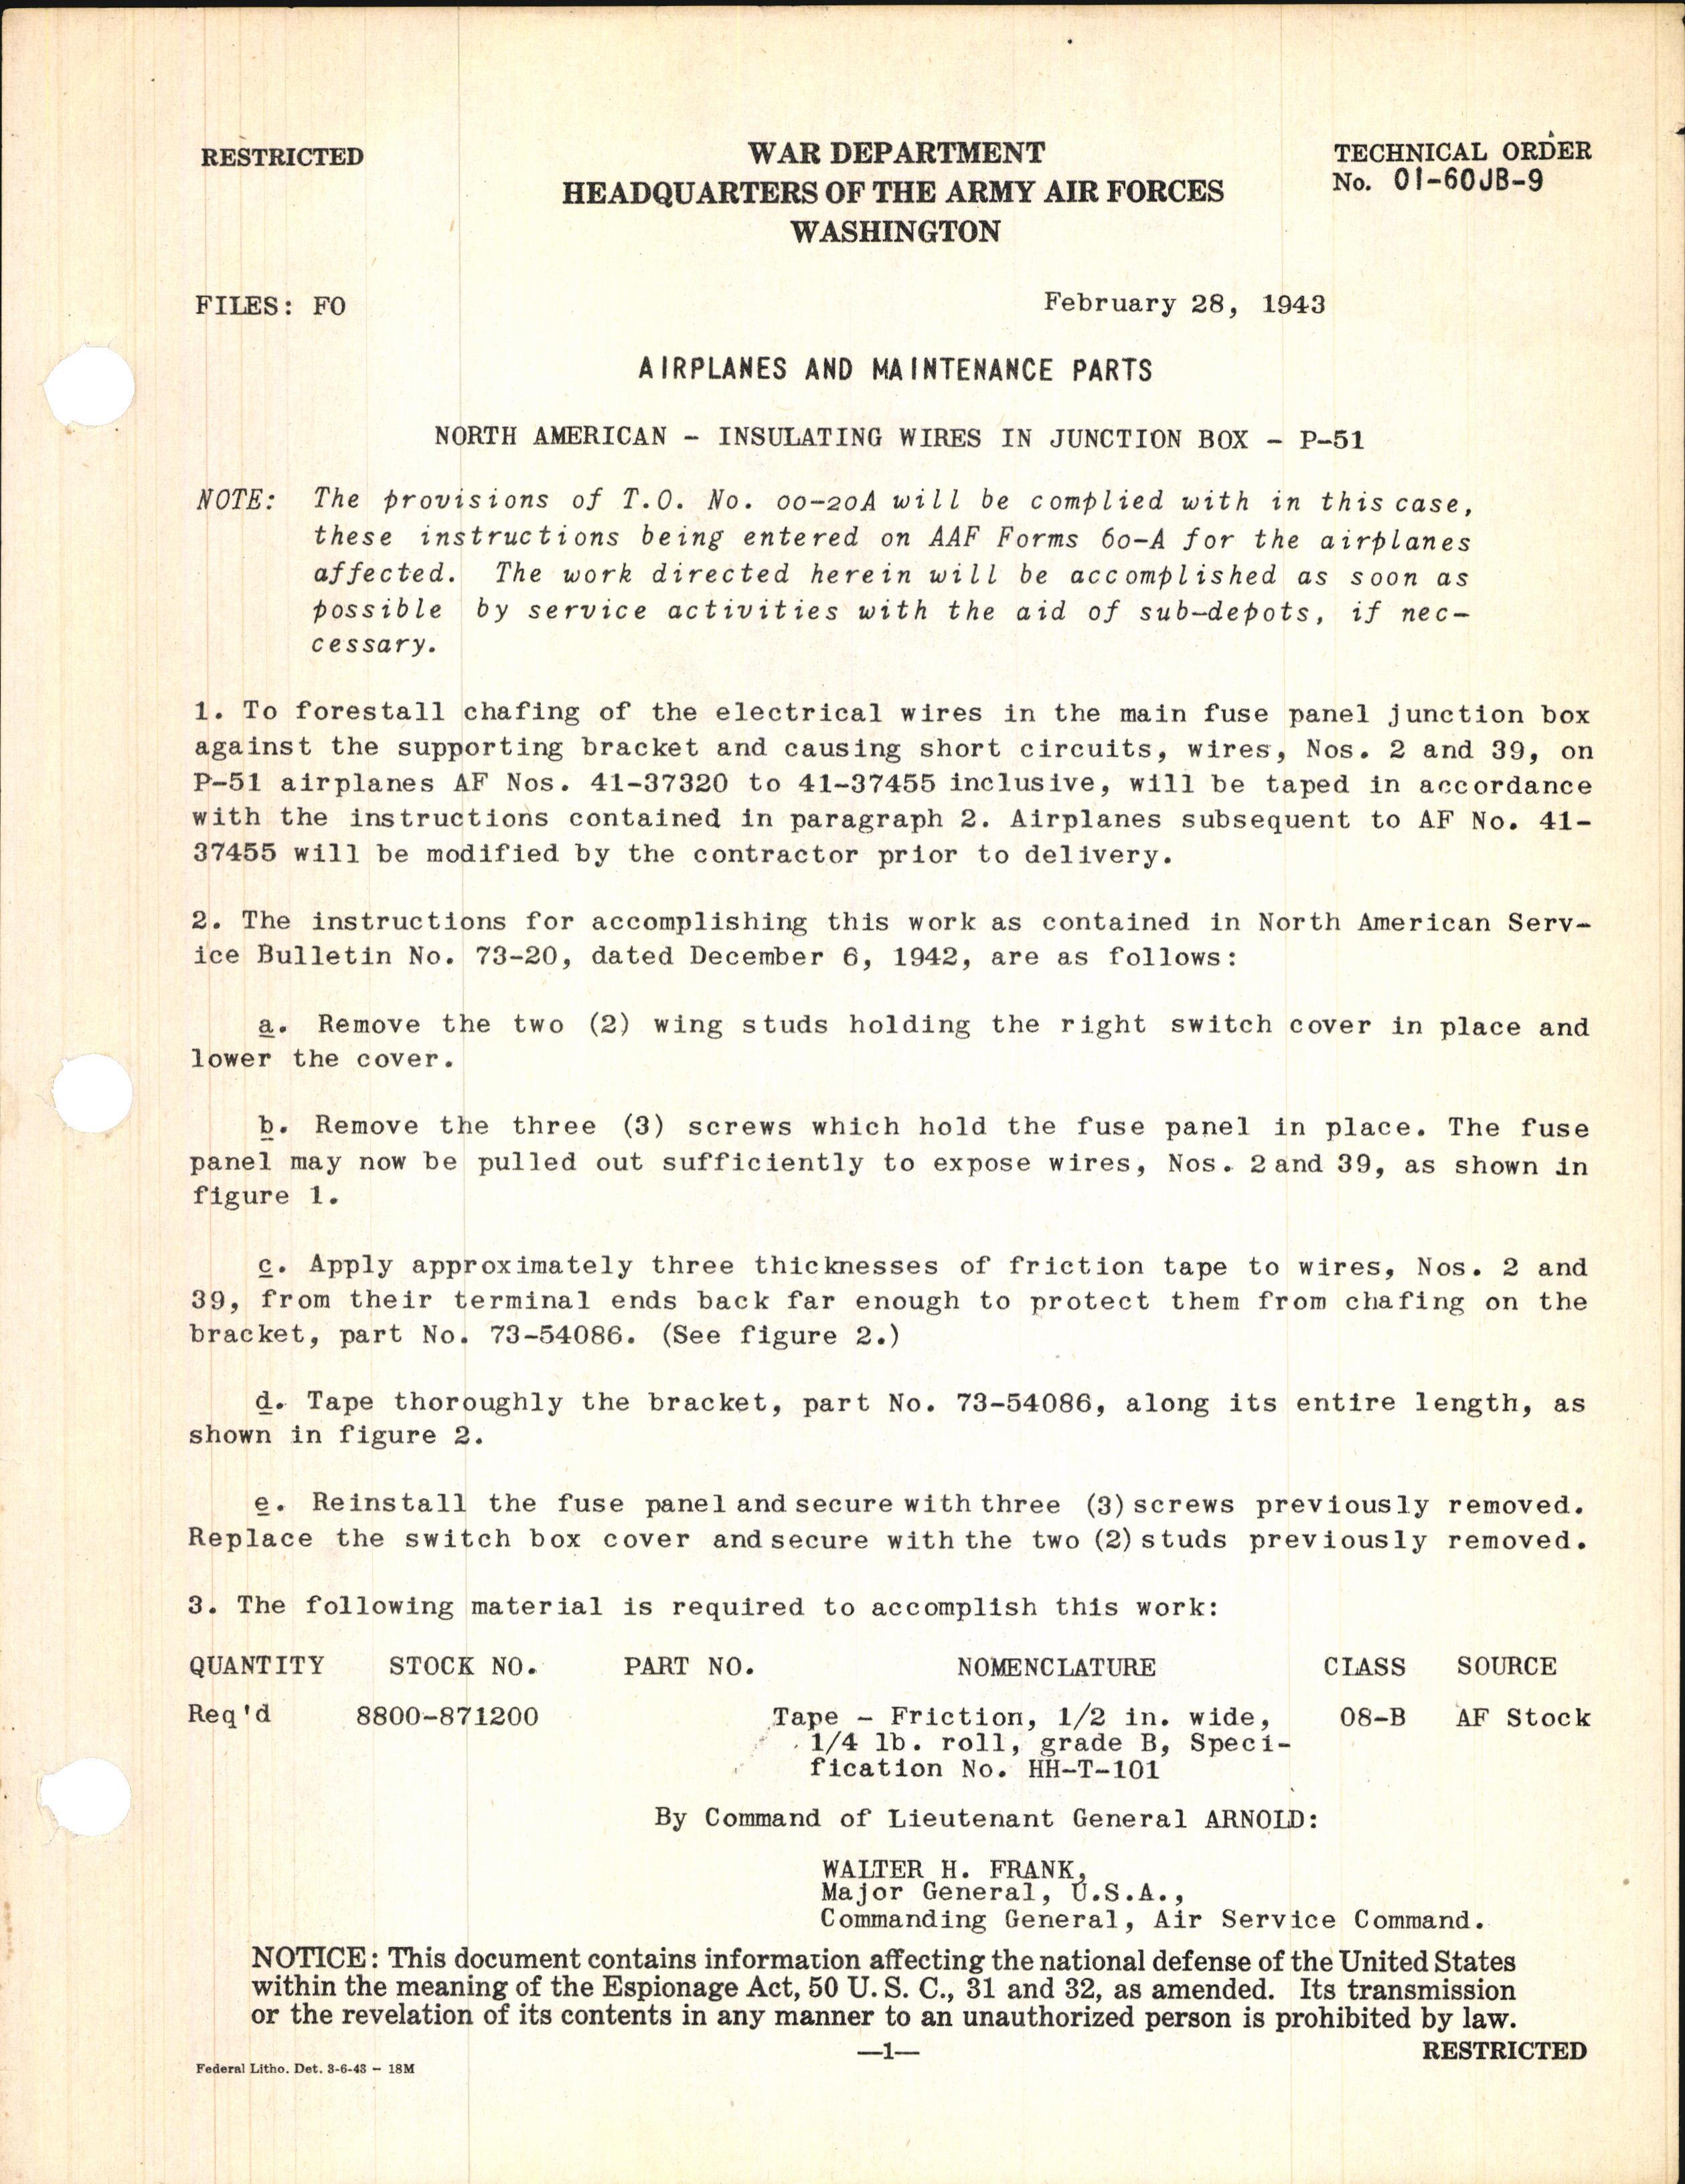 Sample page 1 from AirCorps Library document: Insulating Wires in Junction Box for P-51